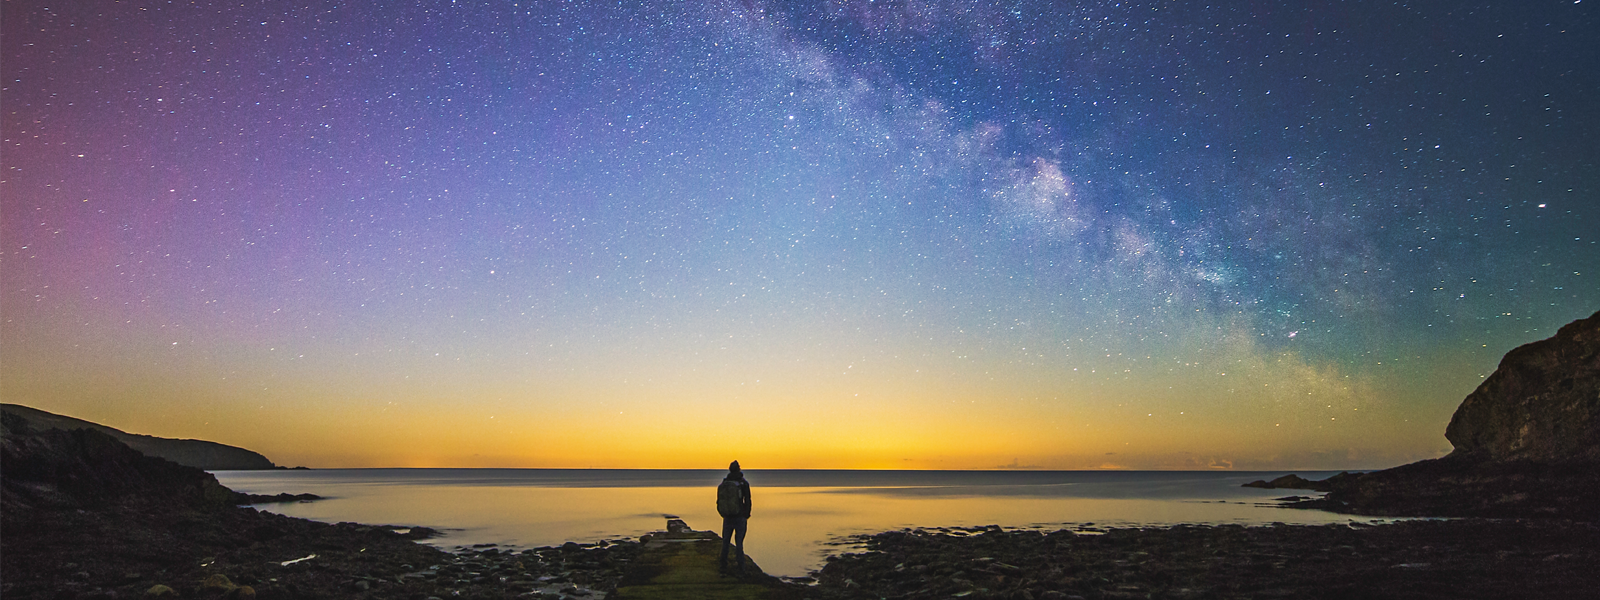 A man stood with his back to the camera gazing at an extraordinary display of stars on the Isle of Man.